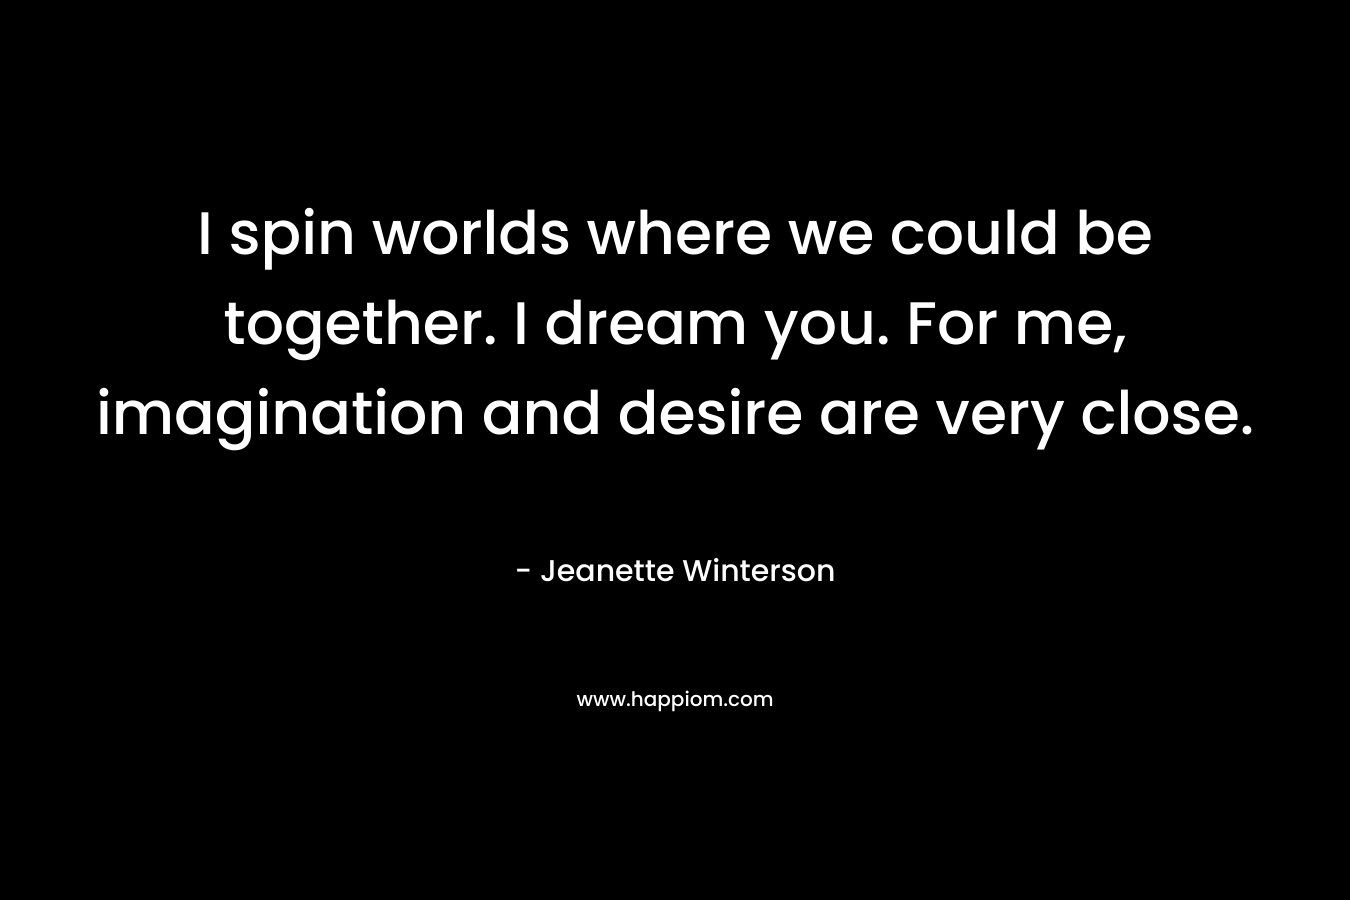 I spin worlds where we could be together. I dream you. For me, imagination and desire are very close.